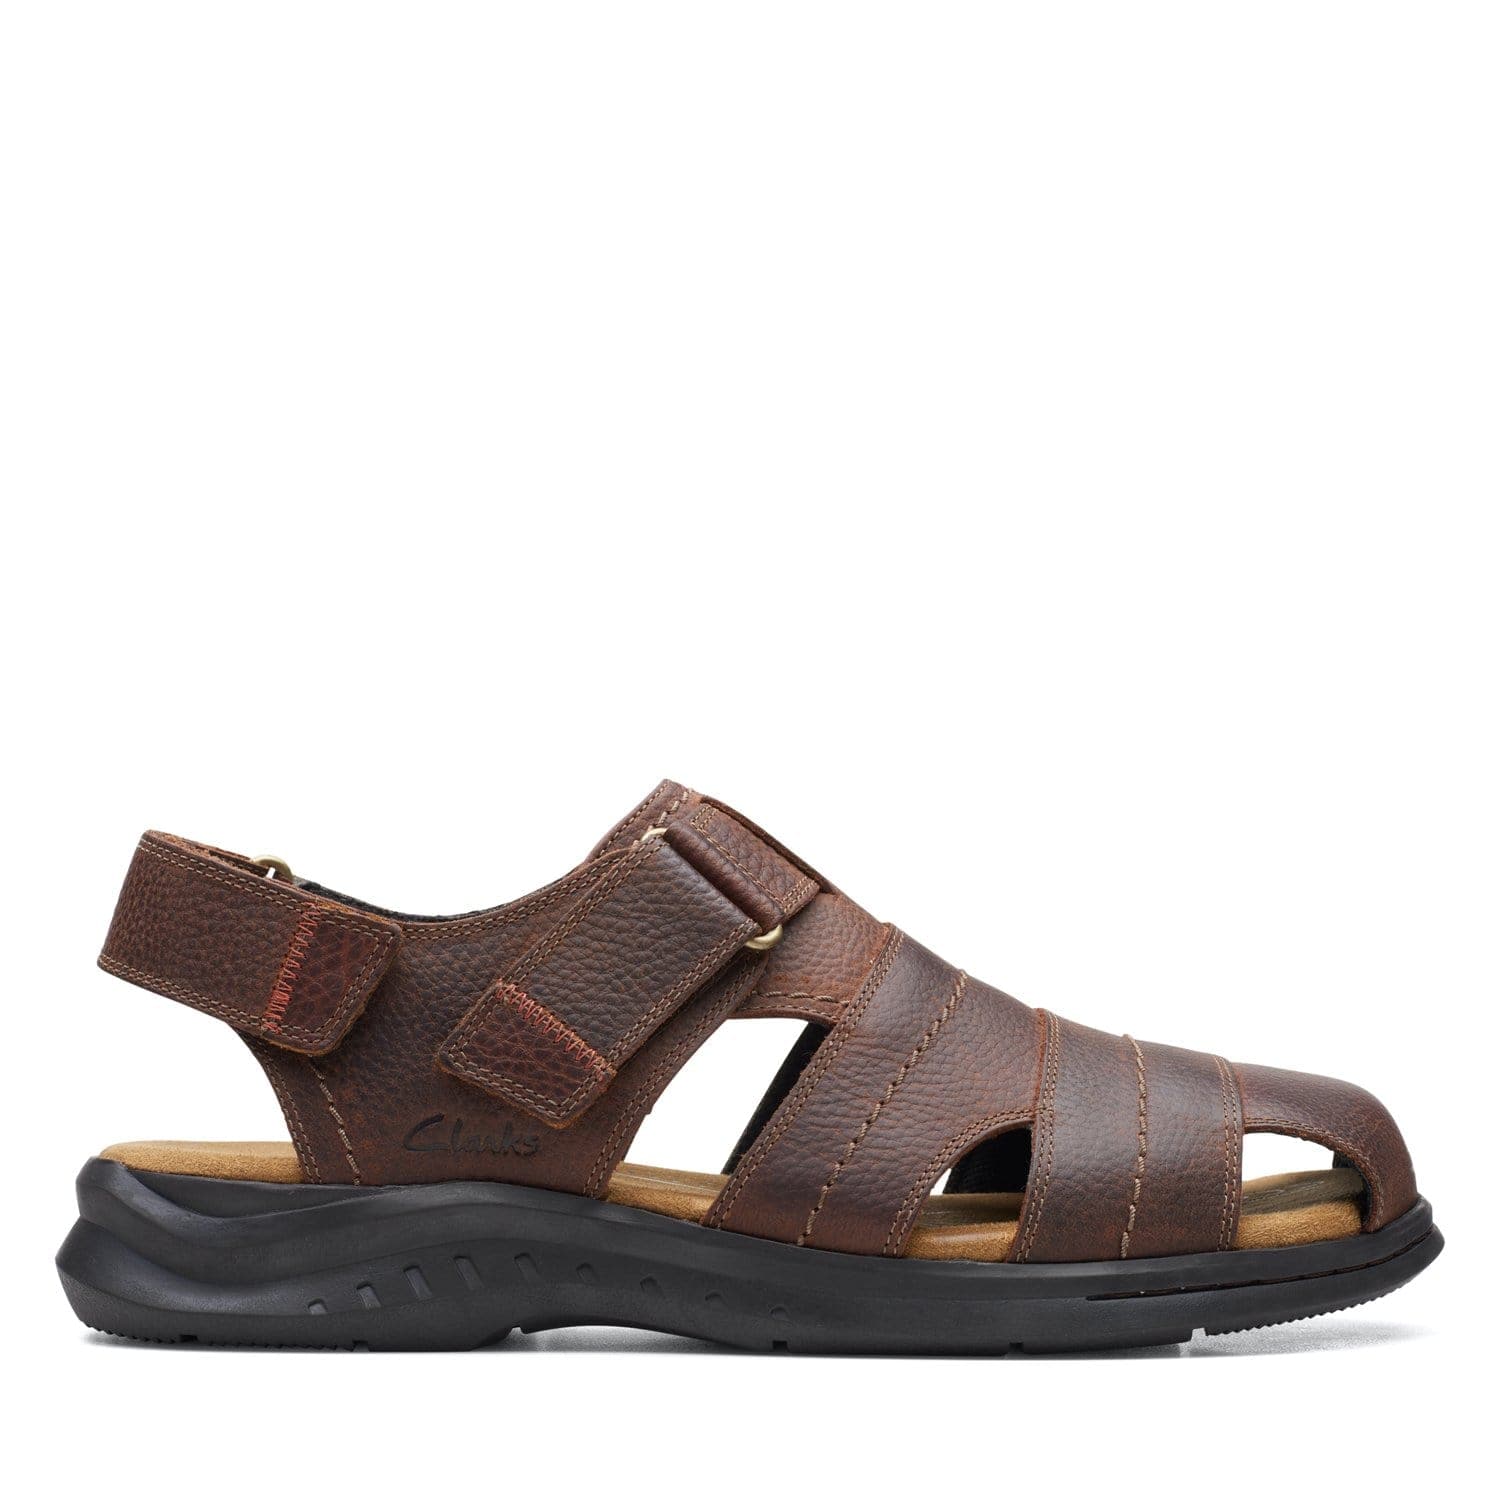 Clarks Hapsford Cove Sandals - Brown Tumbled - 26158013 - G Width (Standard Fit)